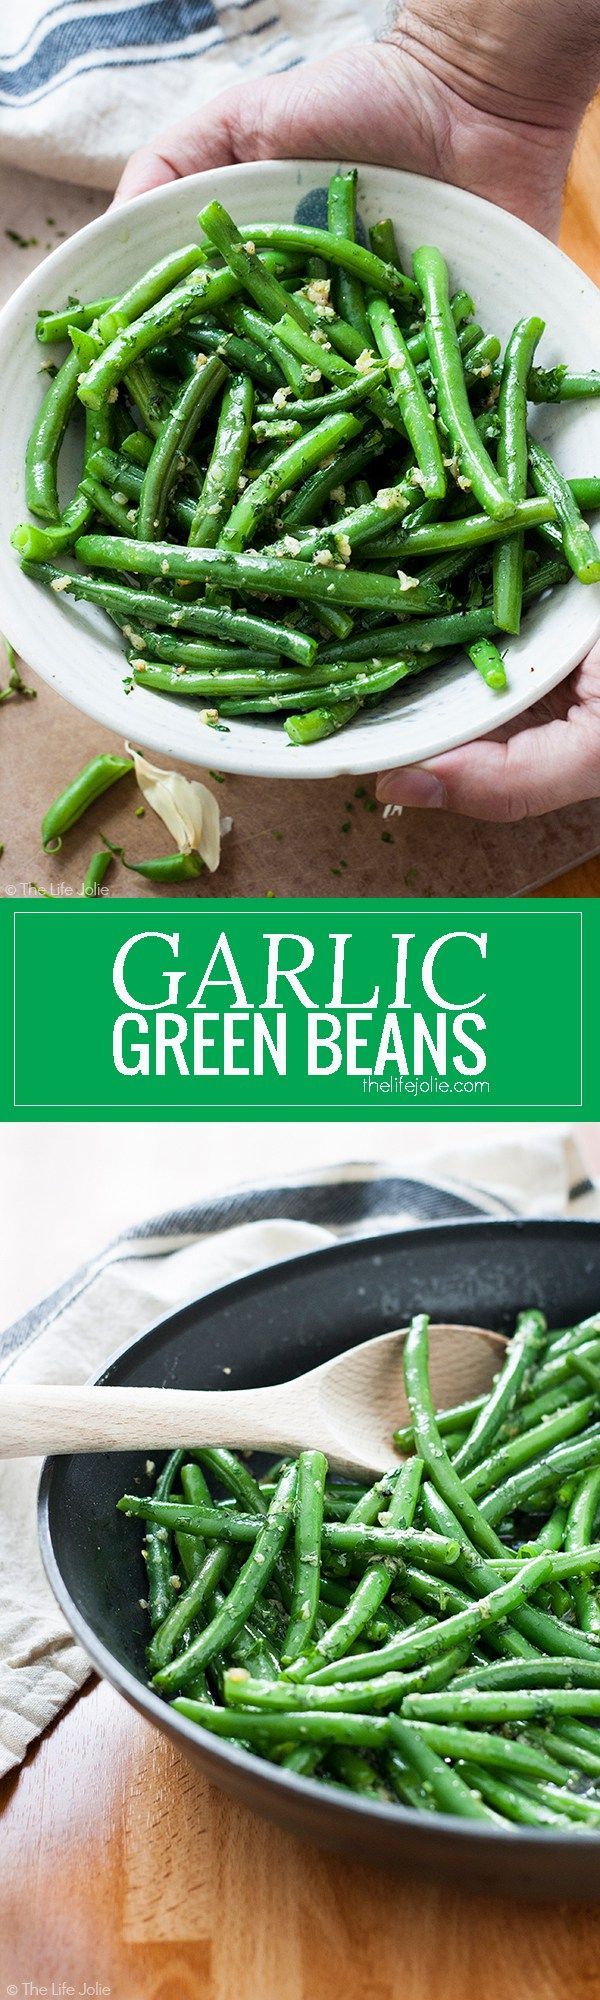 Garlic Green Beans is one of my favorite side dish recipes! It’s easy to make and pretty healthy with Crispy Green Beans sauteed